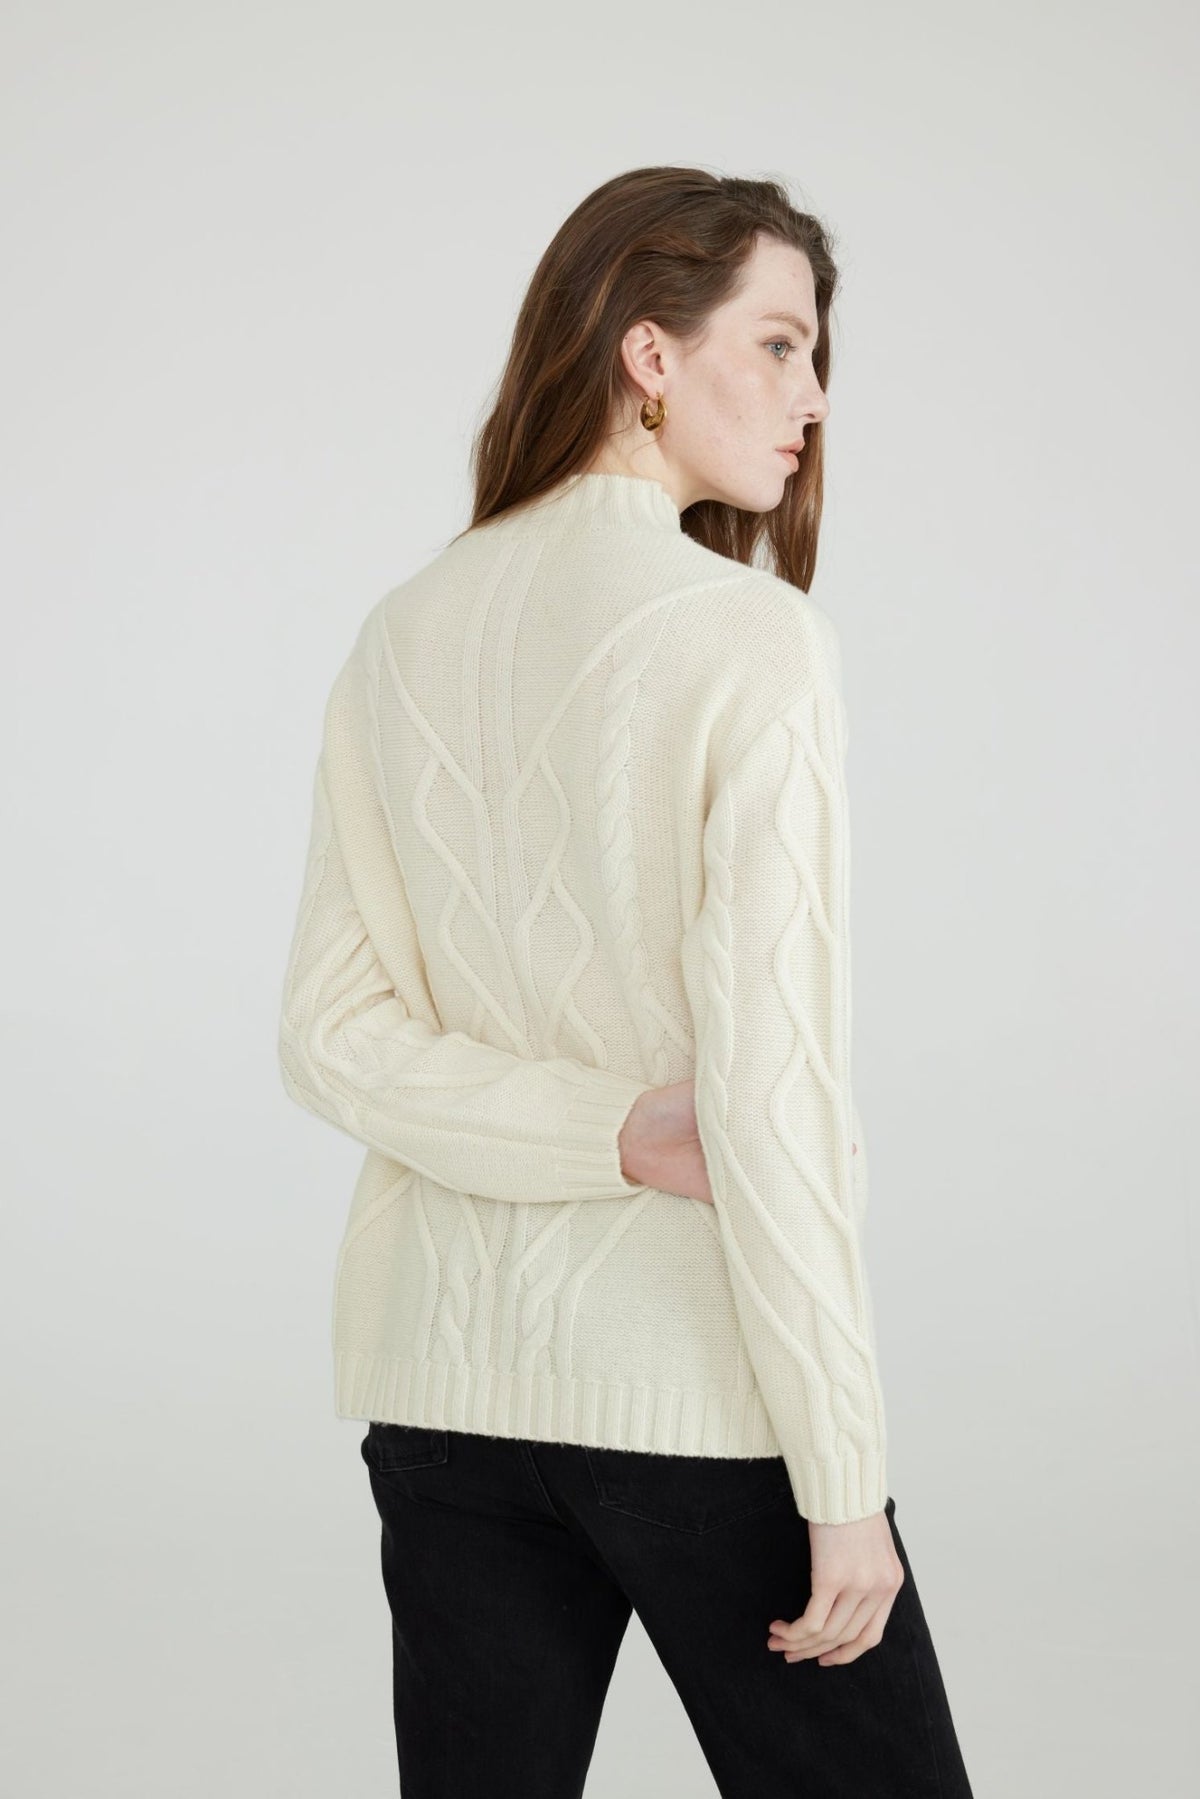 Tess 100%Wool White Cable Sweater - Whisper Mint